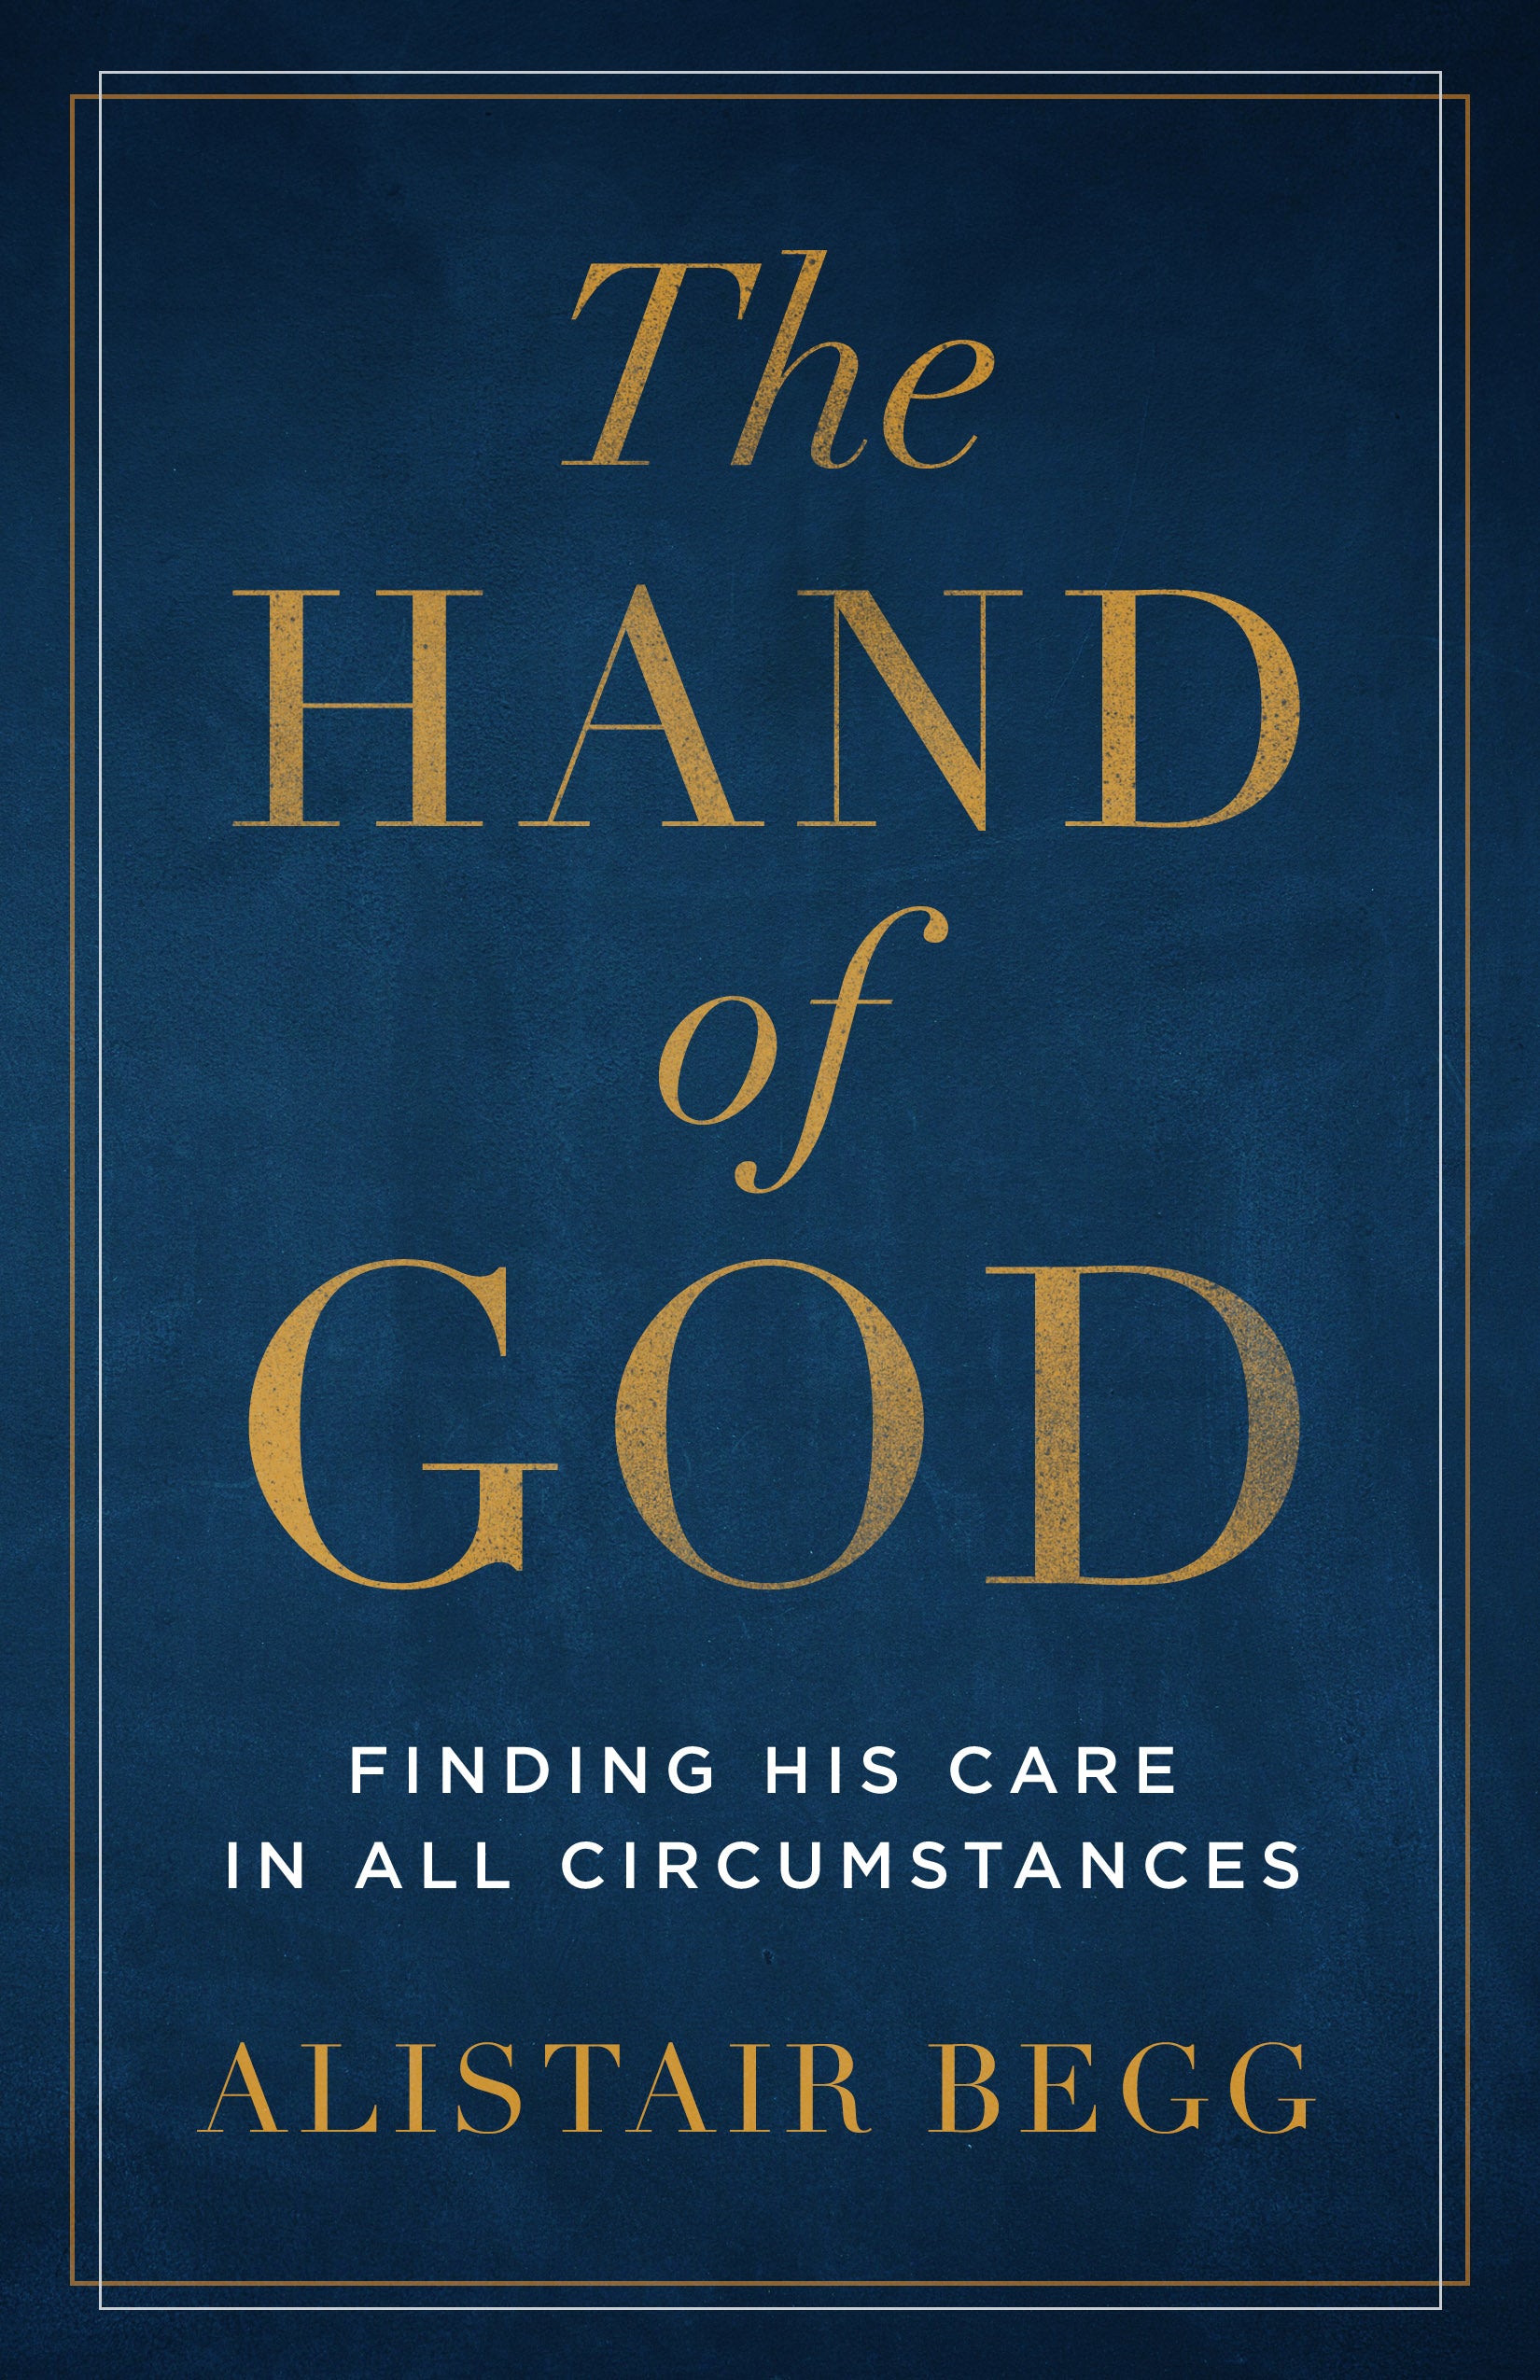 Image of The Hand of God other